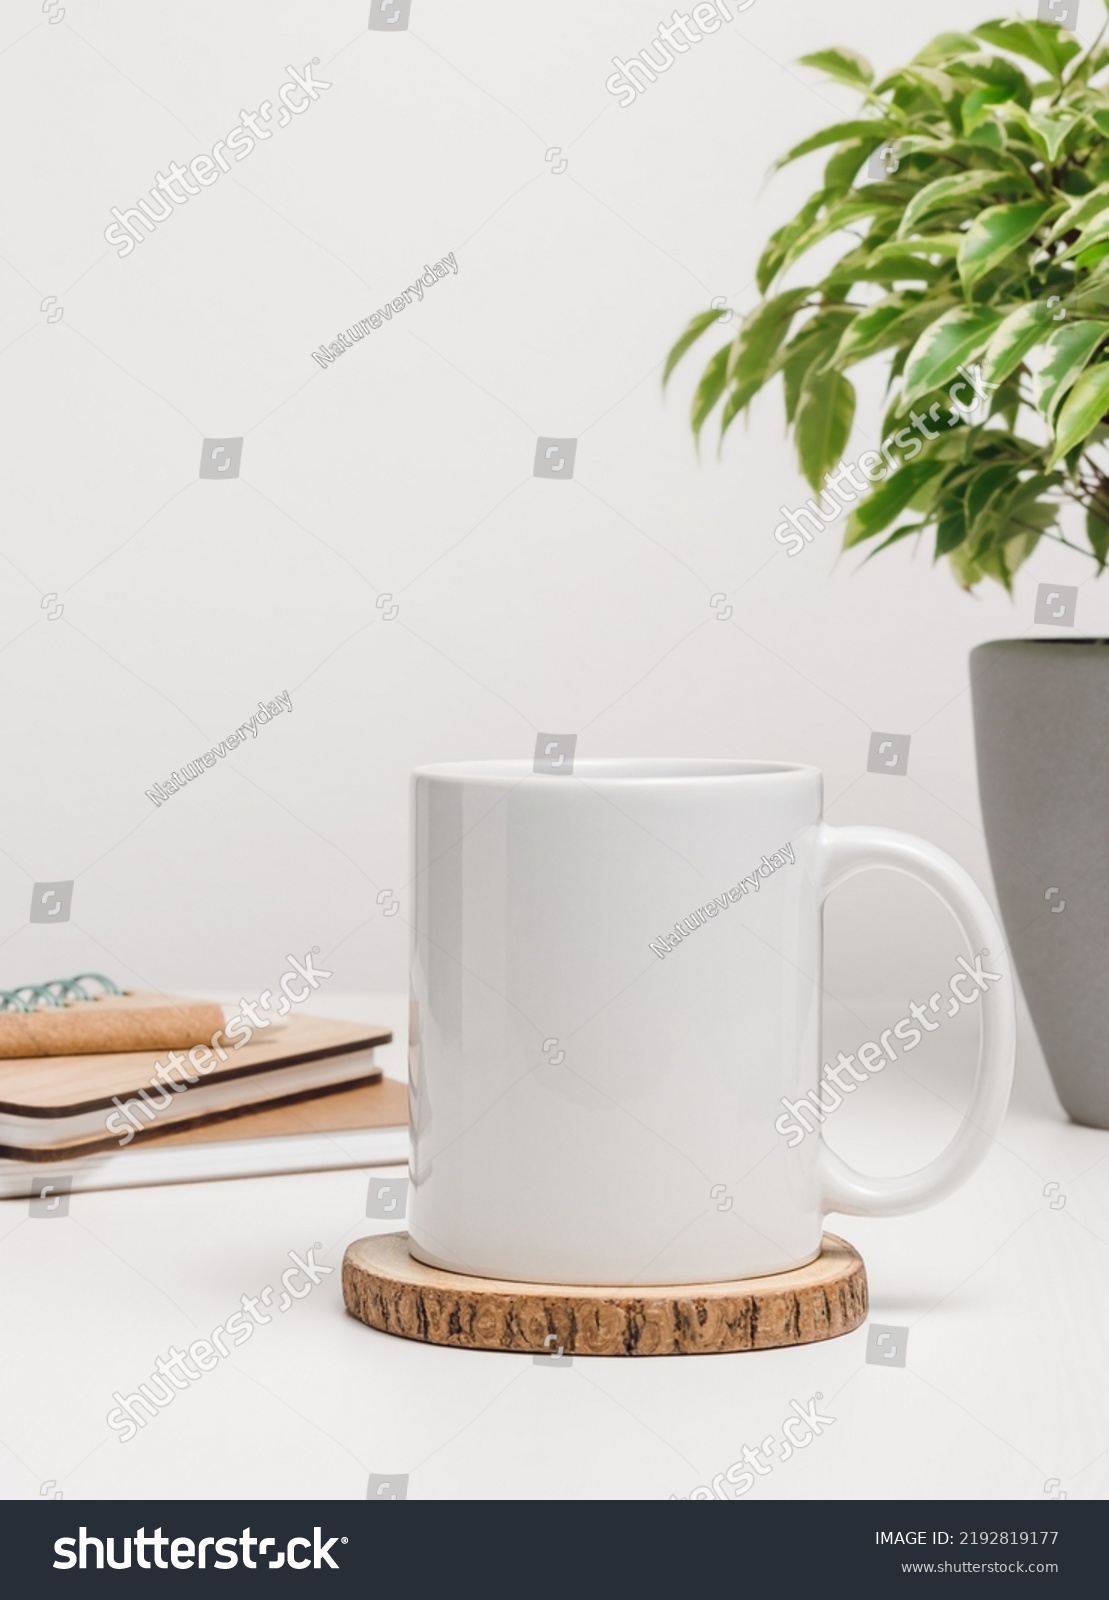 Mockup mug with notepads and houseplant at the background. Mug with copy space for logo and brand, mug for the office or education #2192819177